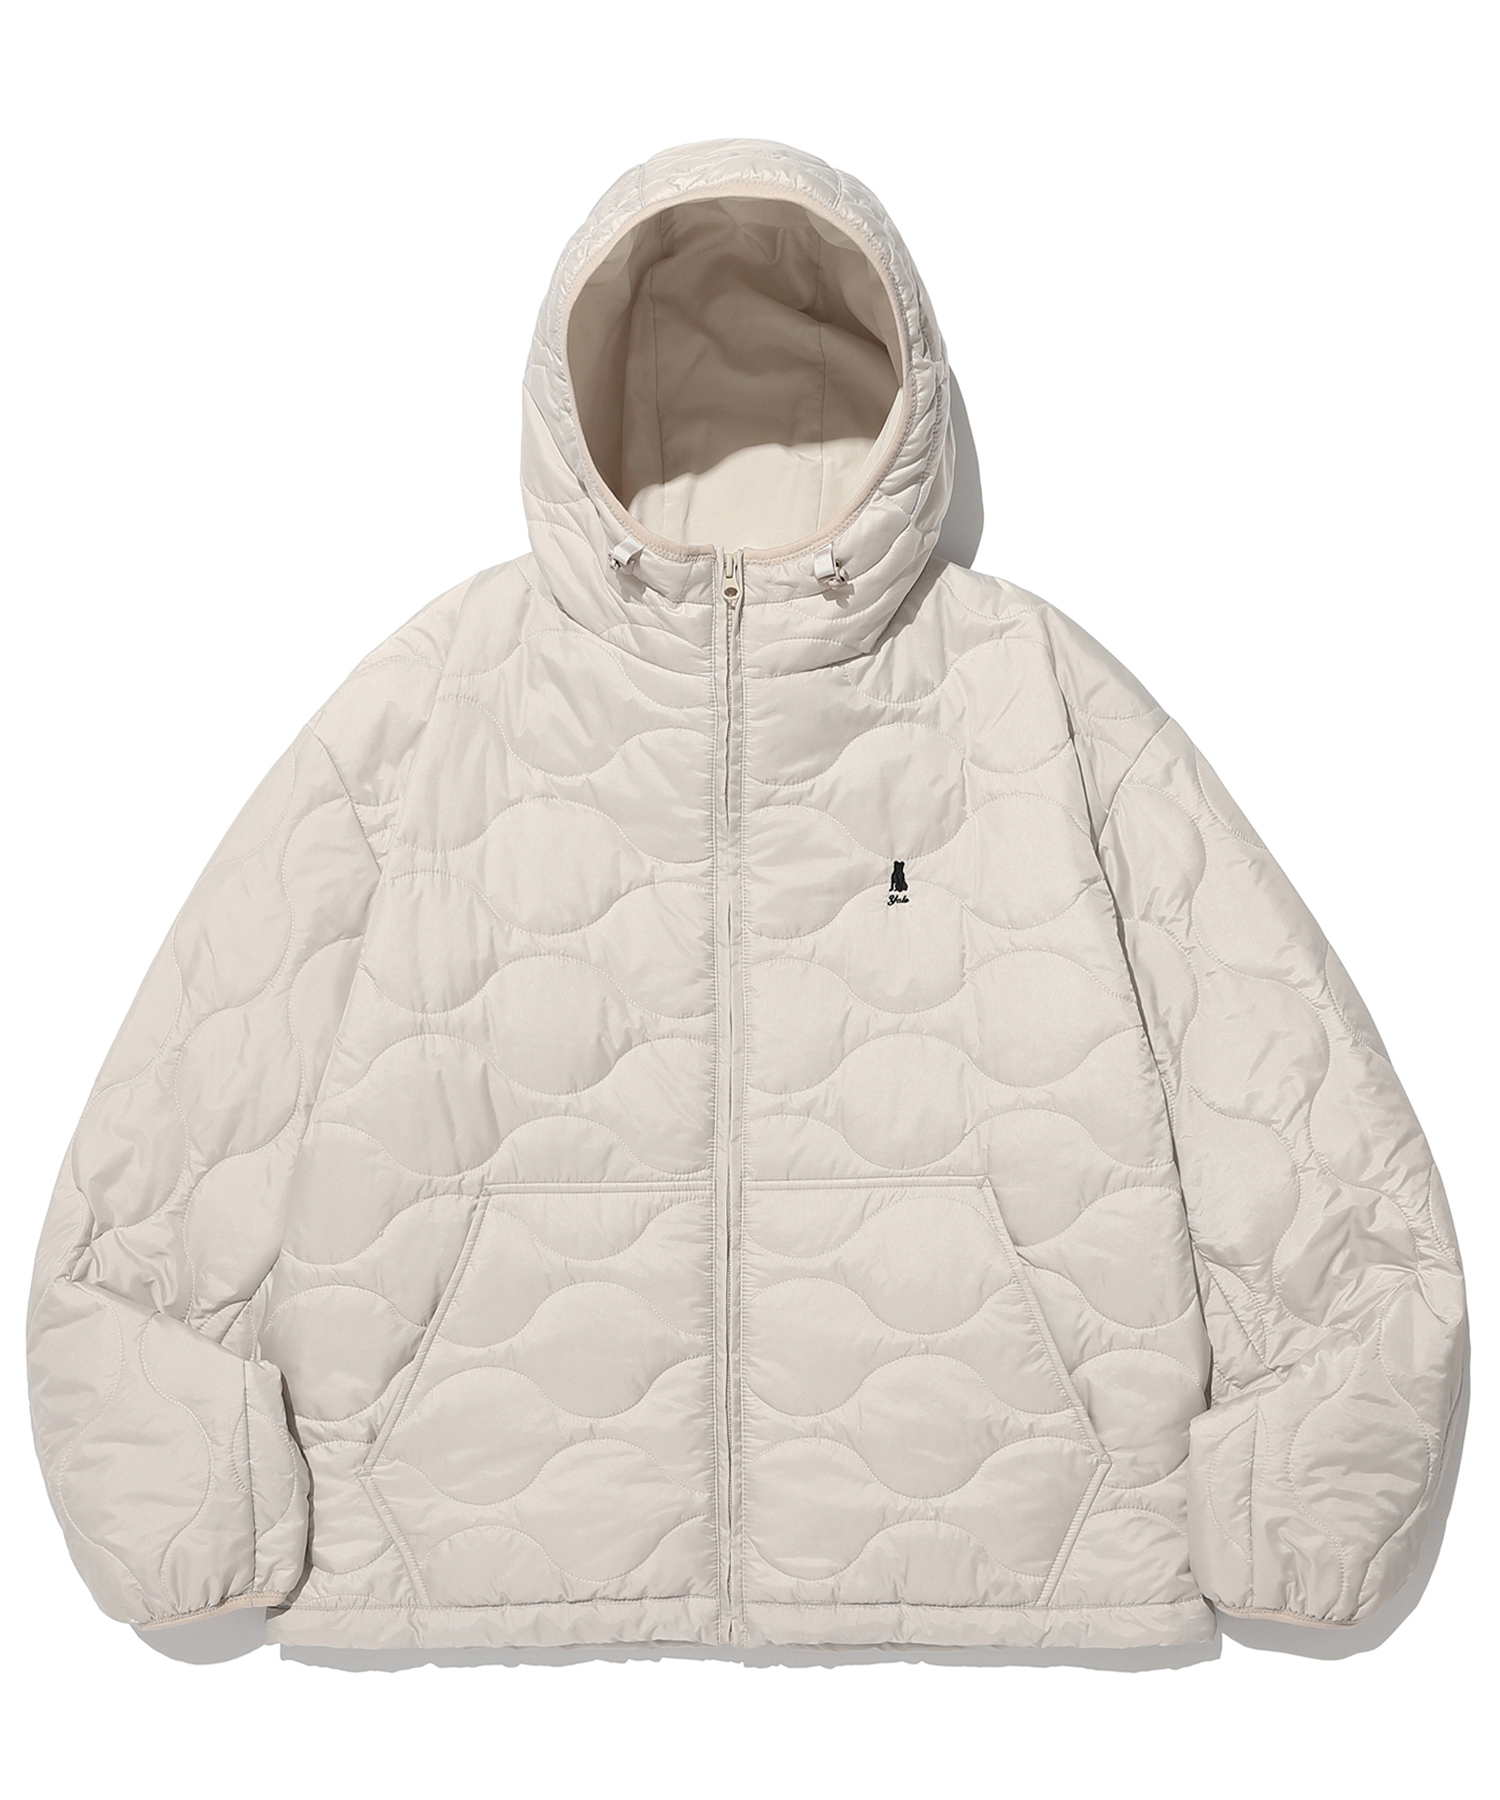 QUILTING HOODED ZIP UP IVORY